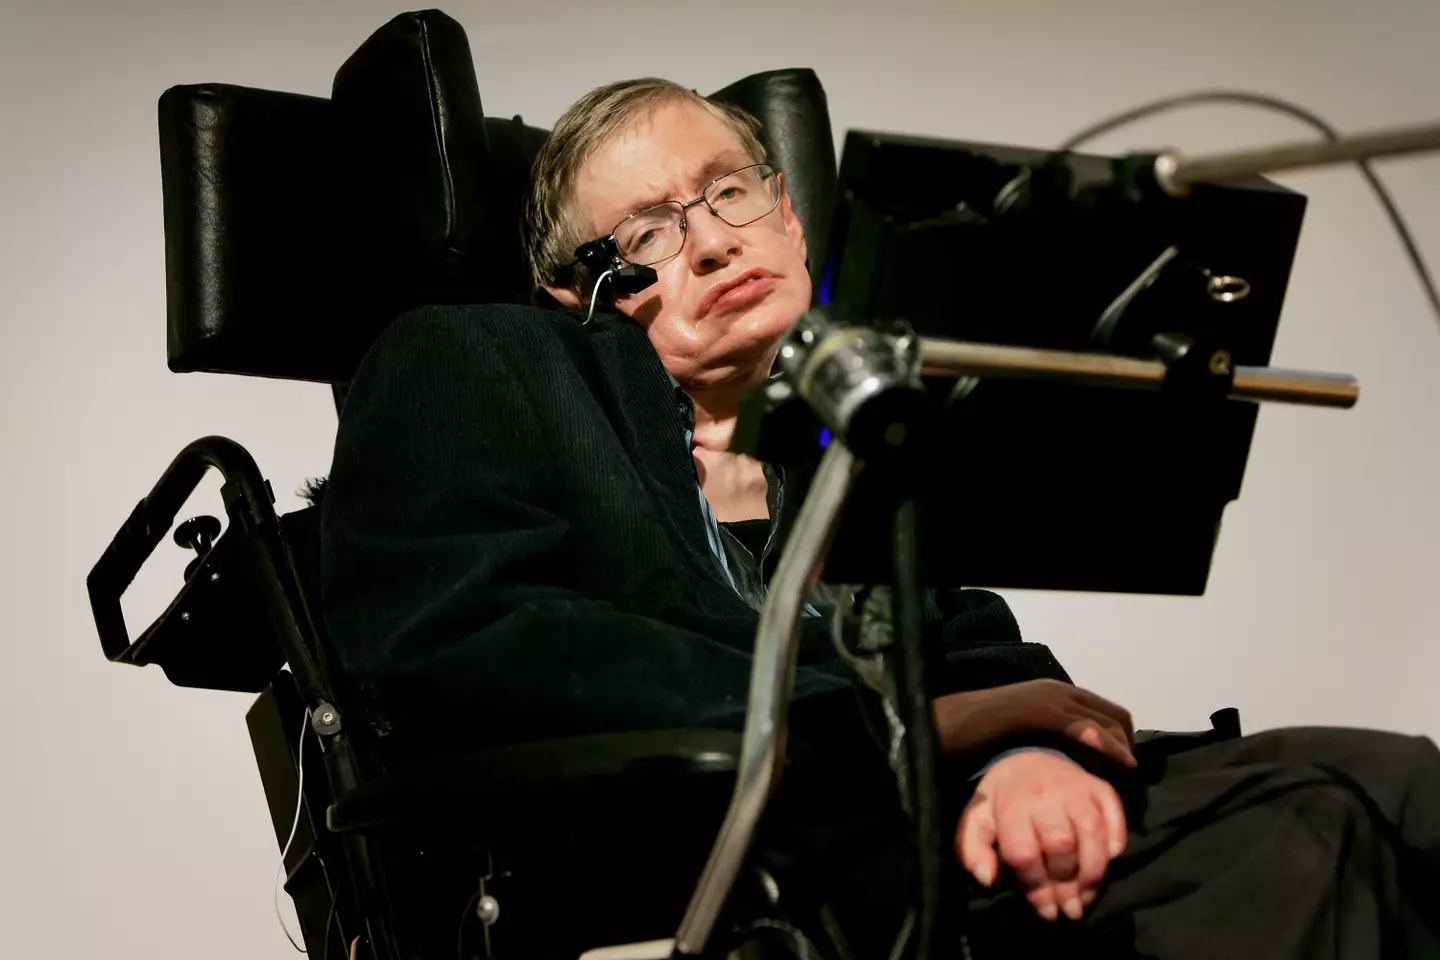 Stephen Hawking urged people not to make contact with aliens. (Bruno Vincent/Getty Images)